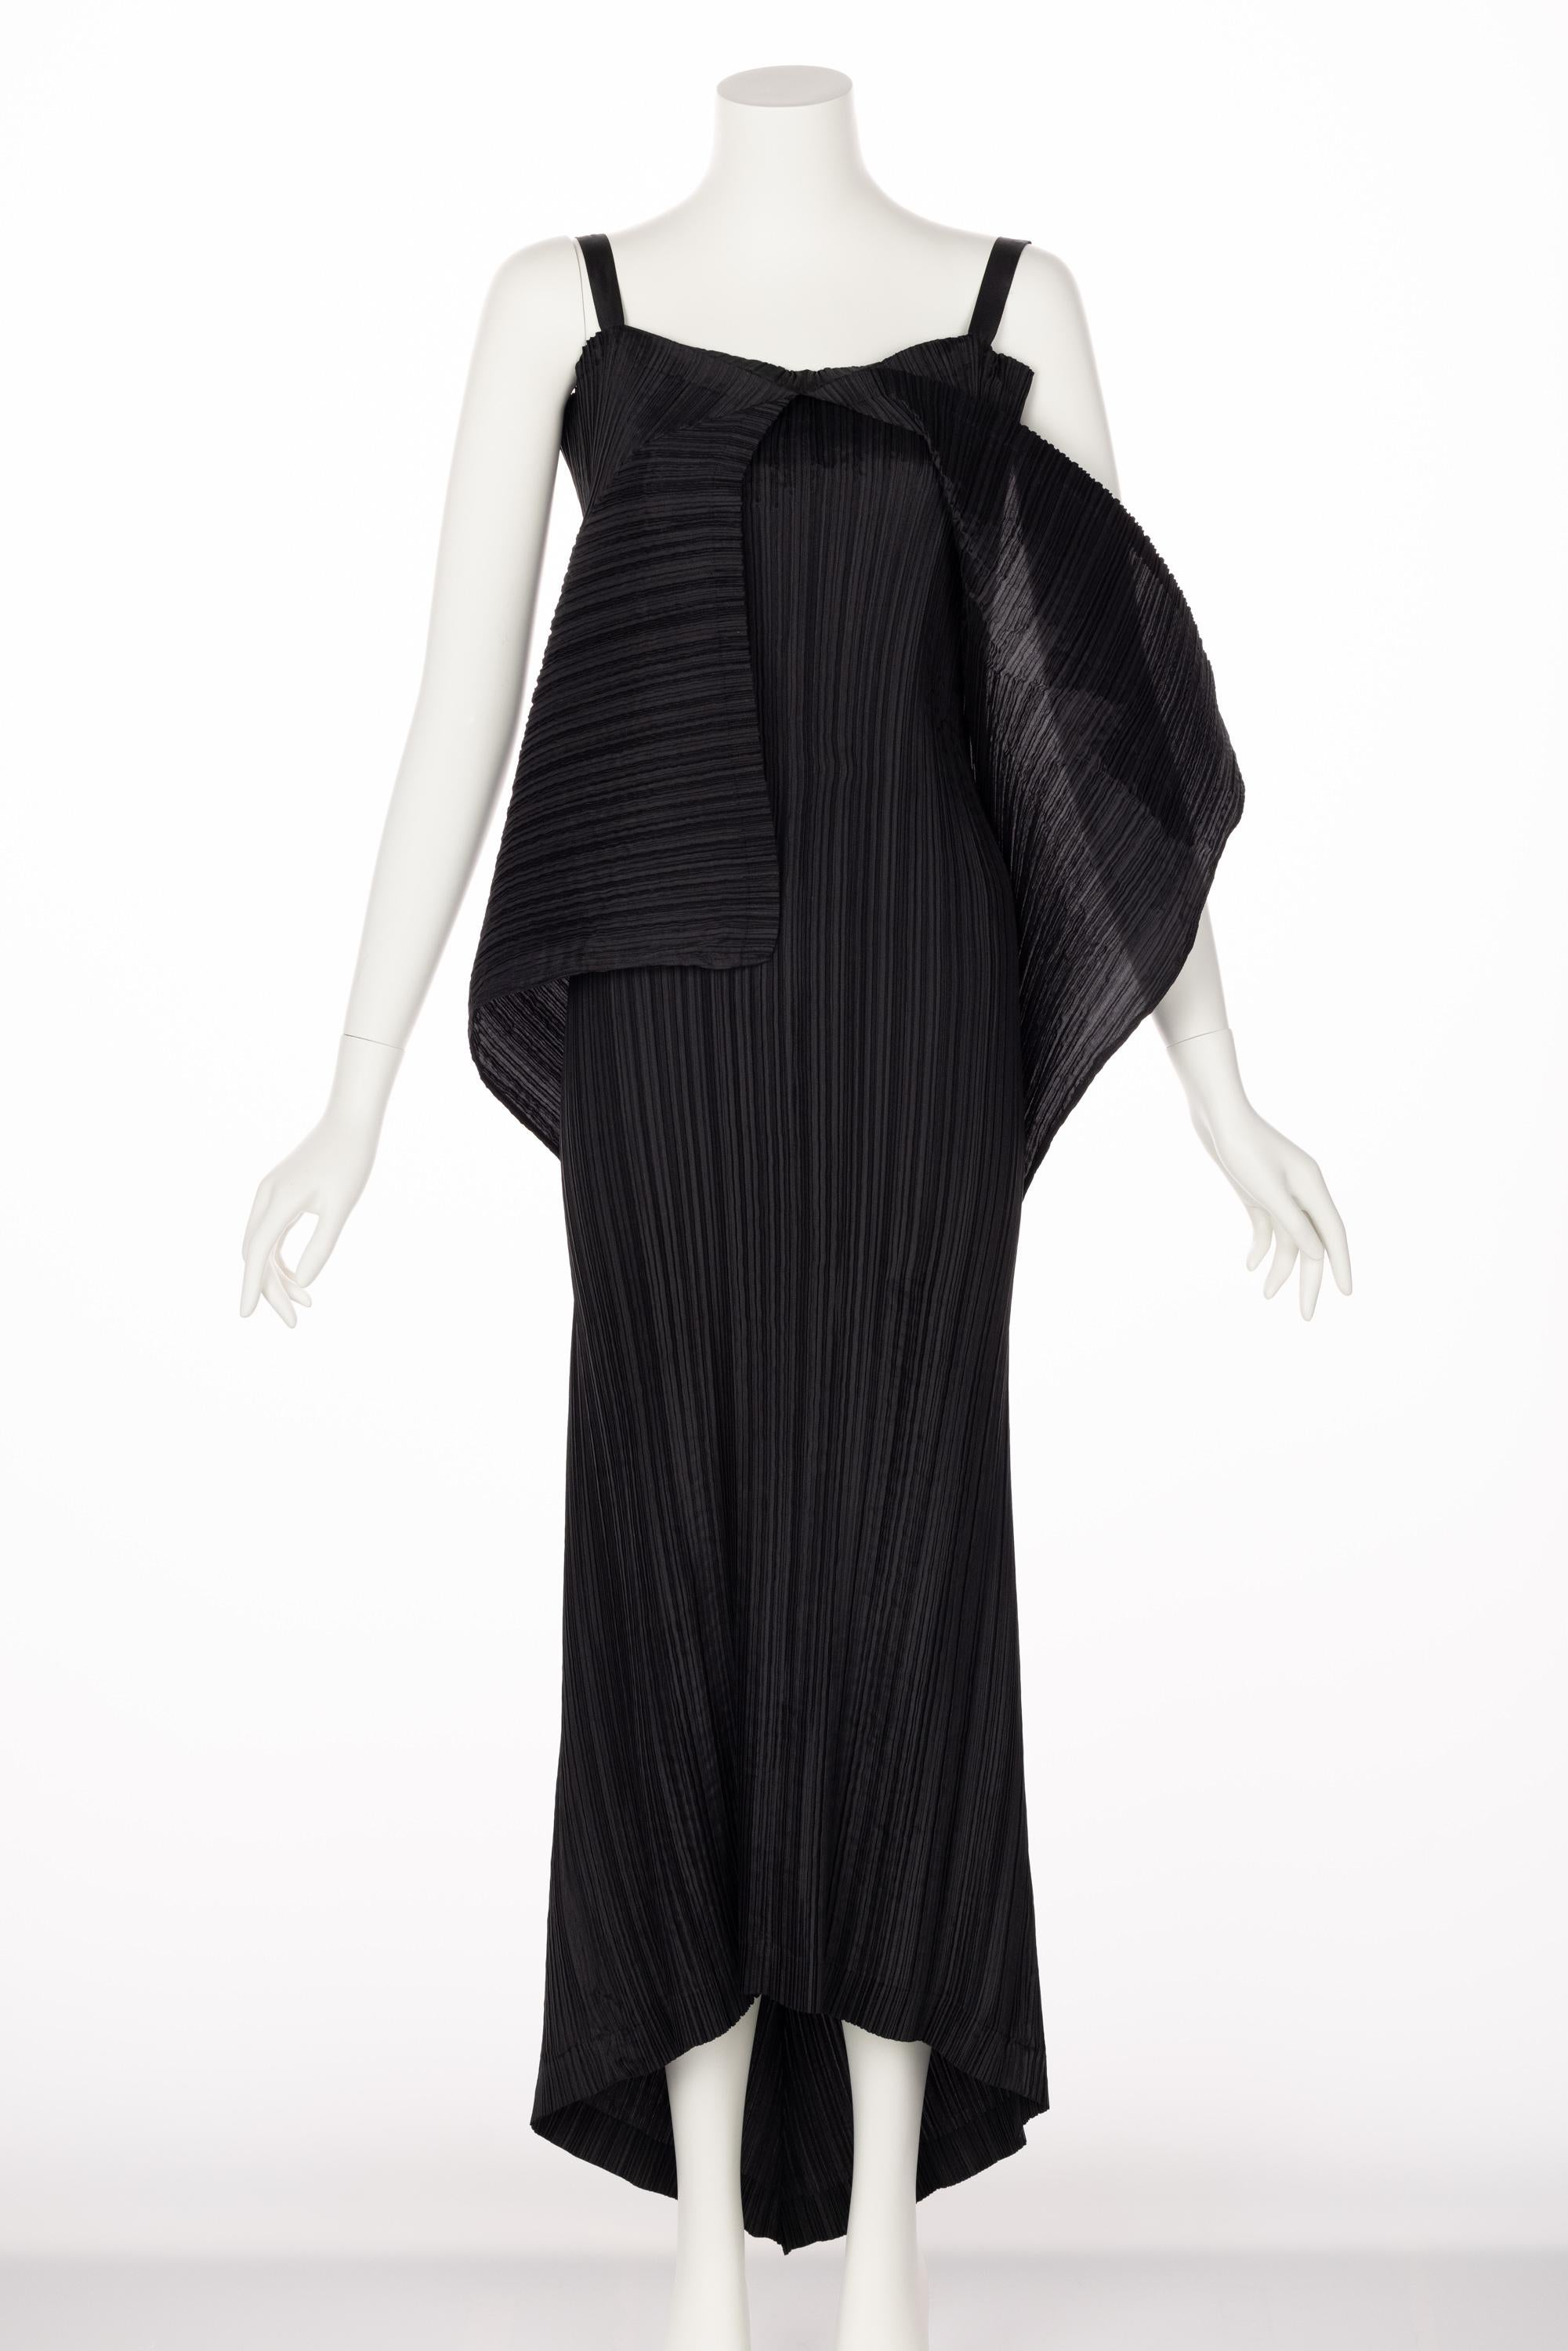 Issey Miyake Black Pleated Sculptural Sleeveless Maxi Dress, 1990s In Excellent Condition For Sale In Boca Raton, FL